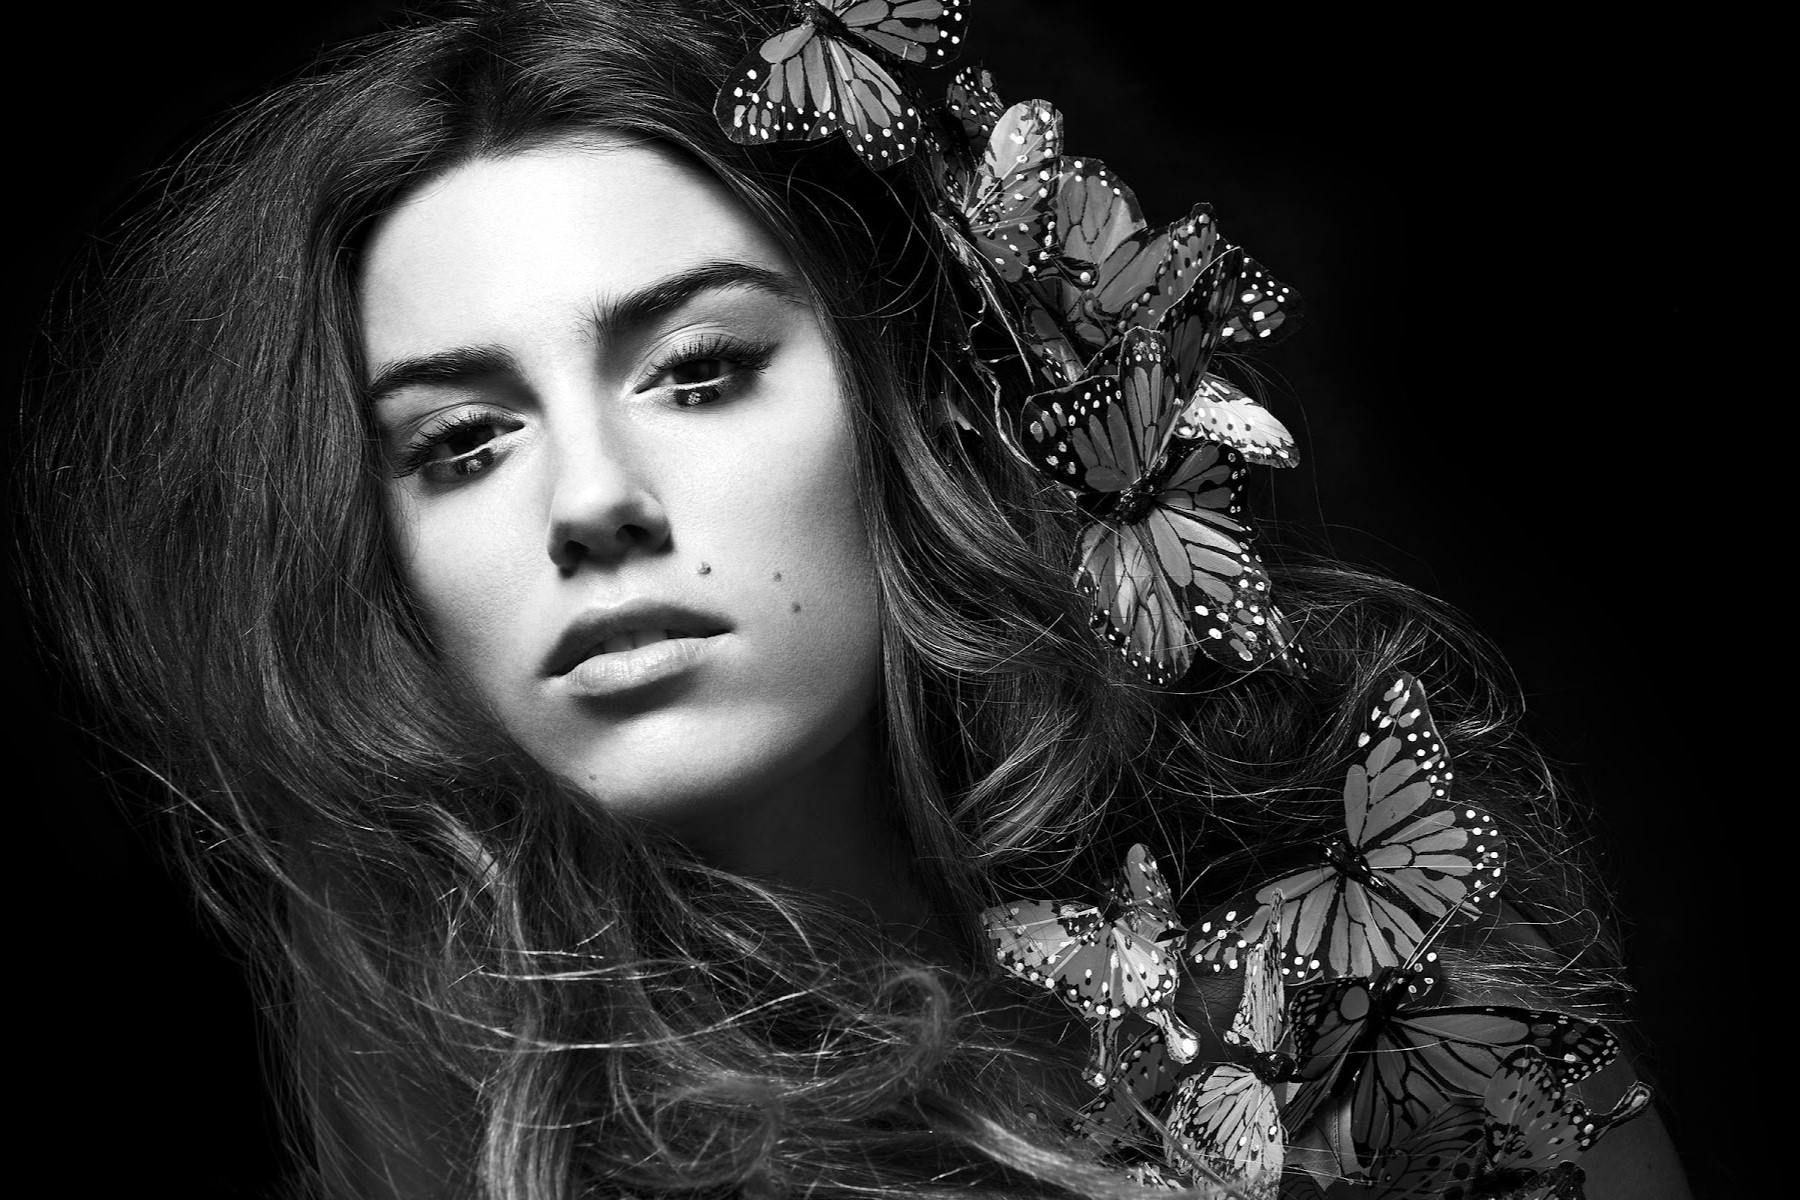 10 Astounding Facts About Ryn Weaver - Facts.net